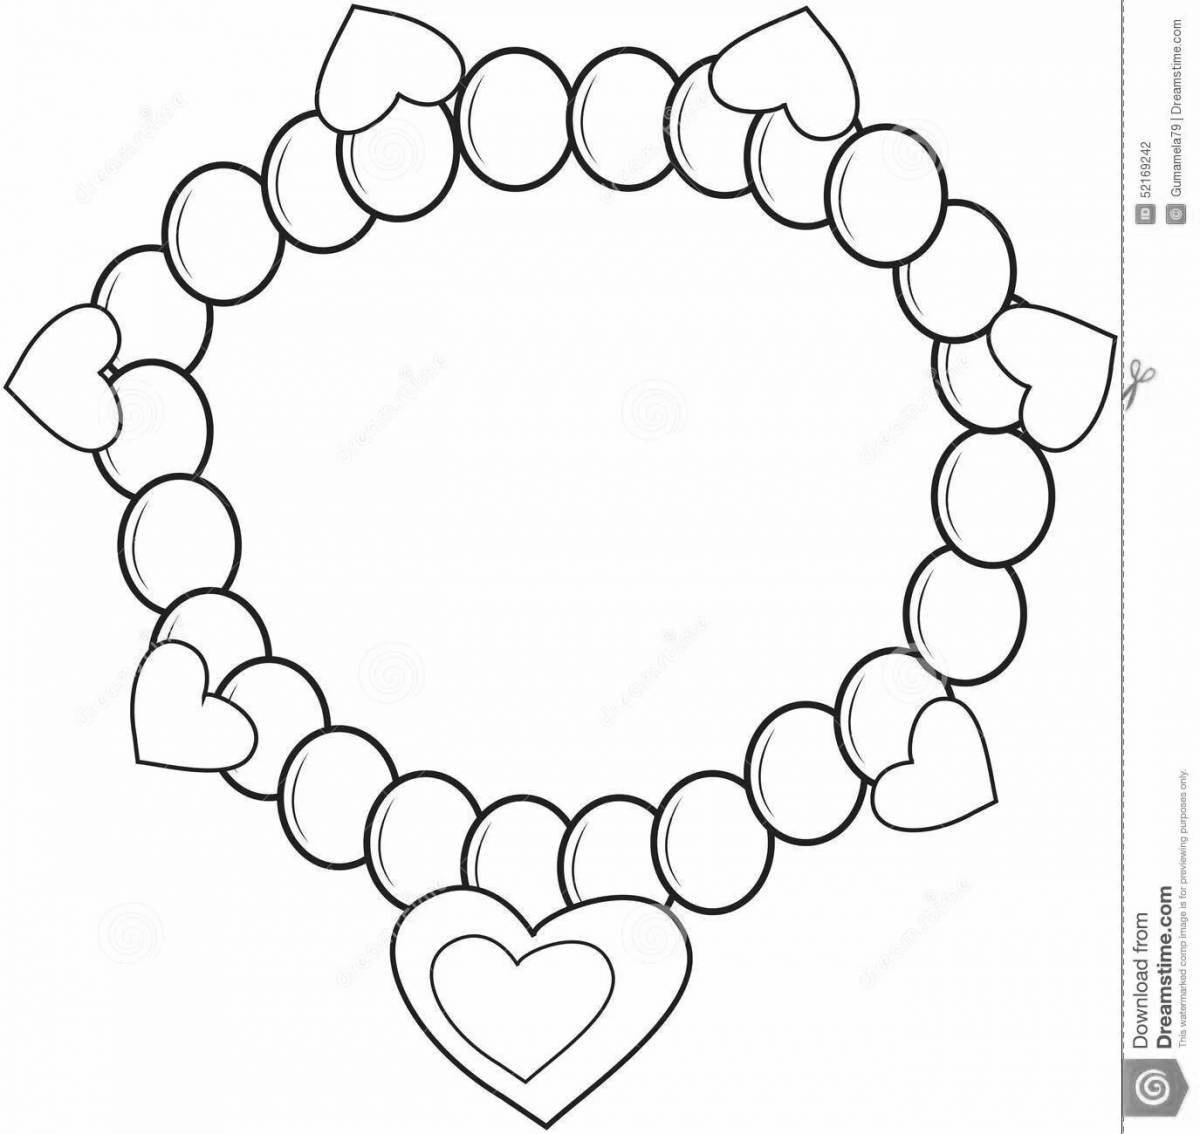 Coloured beads coloring book for kids to learn